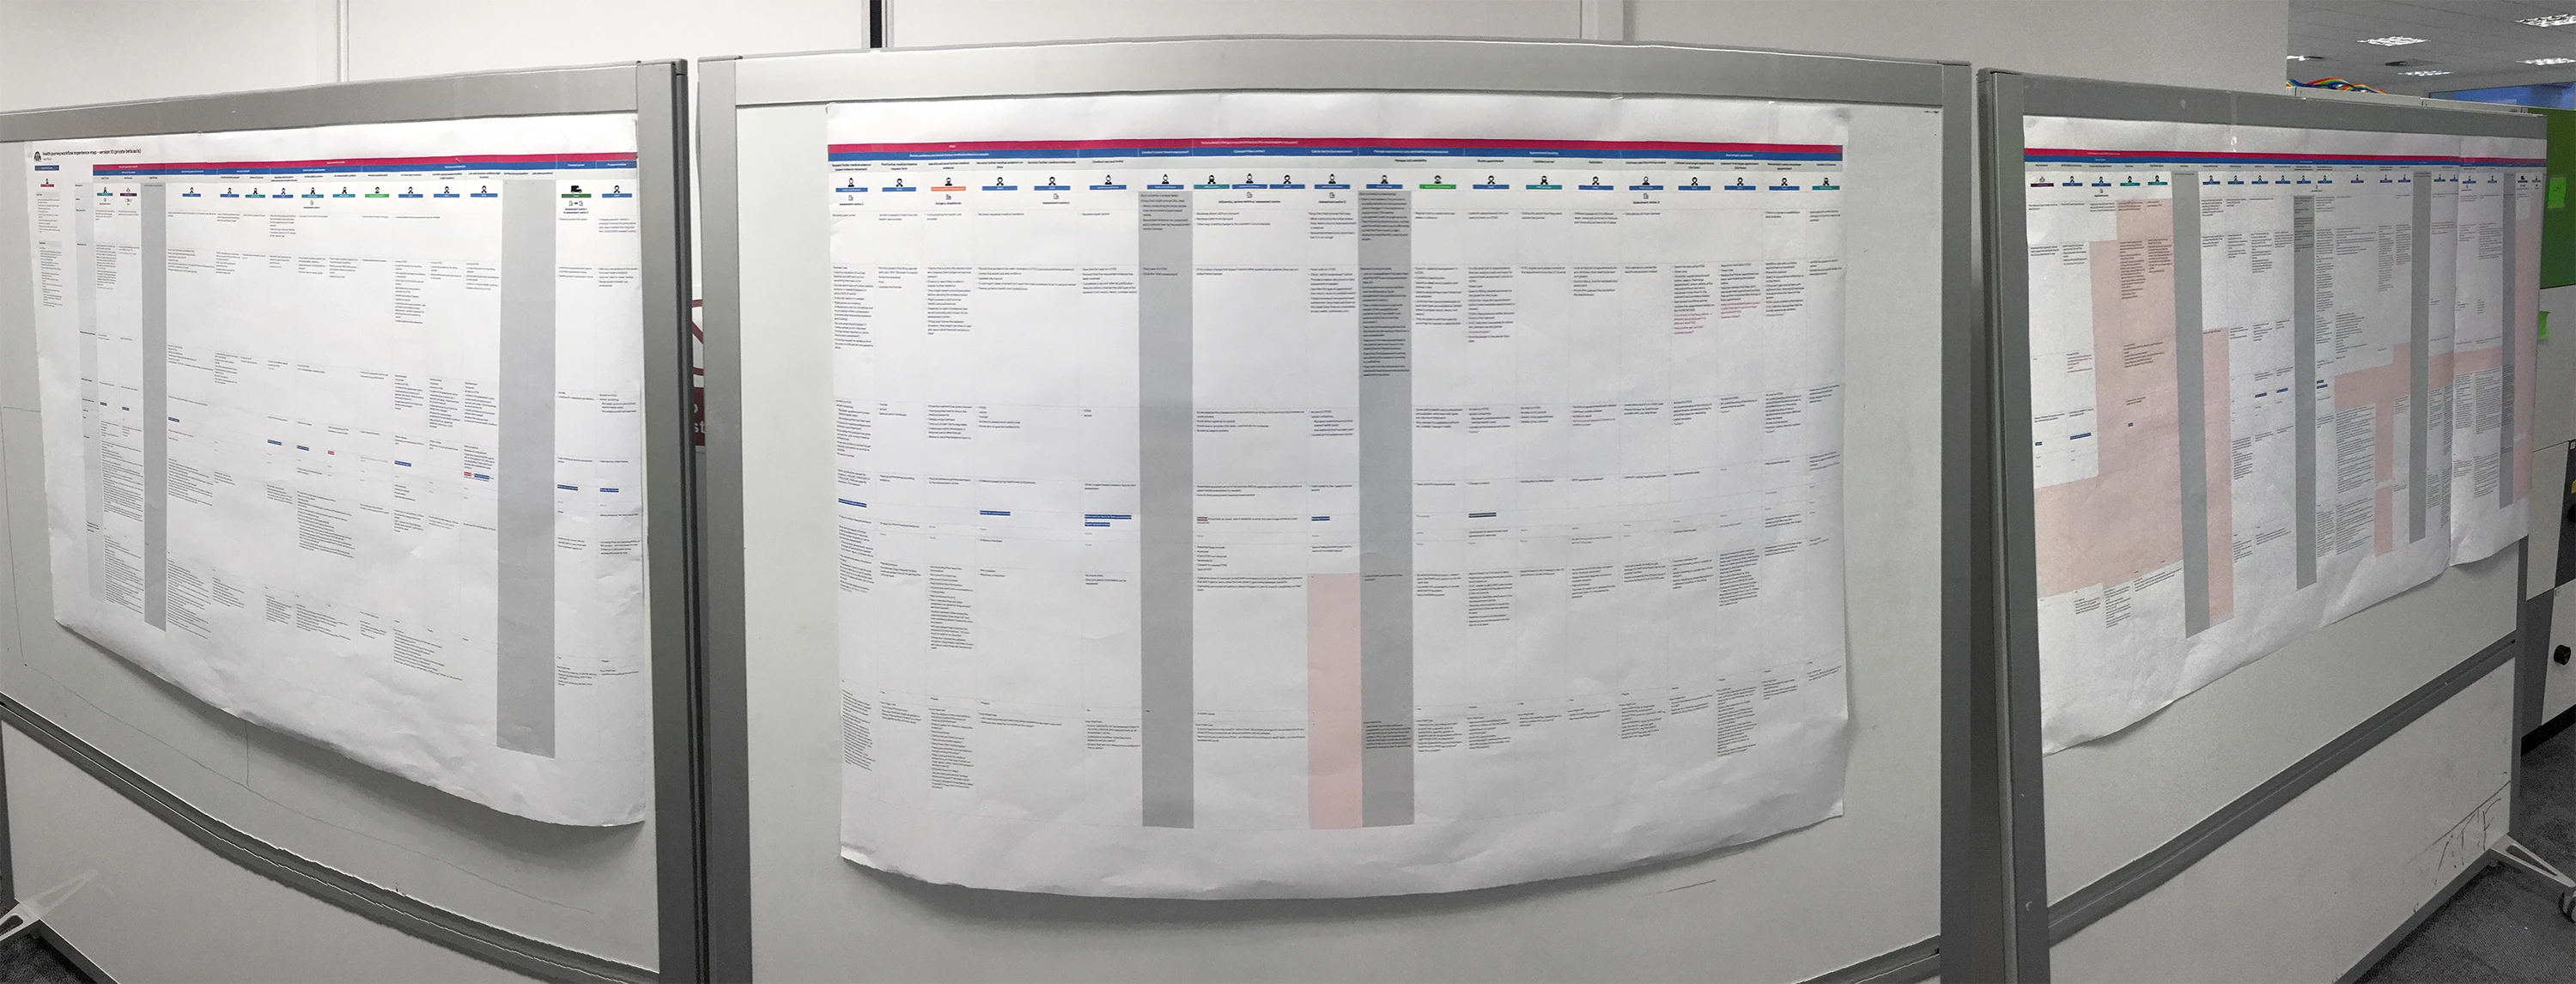 Printed service map. Content not visible.